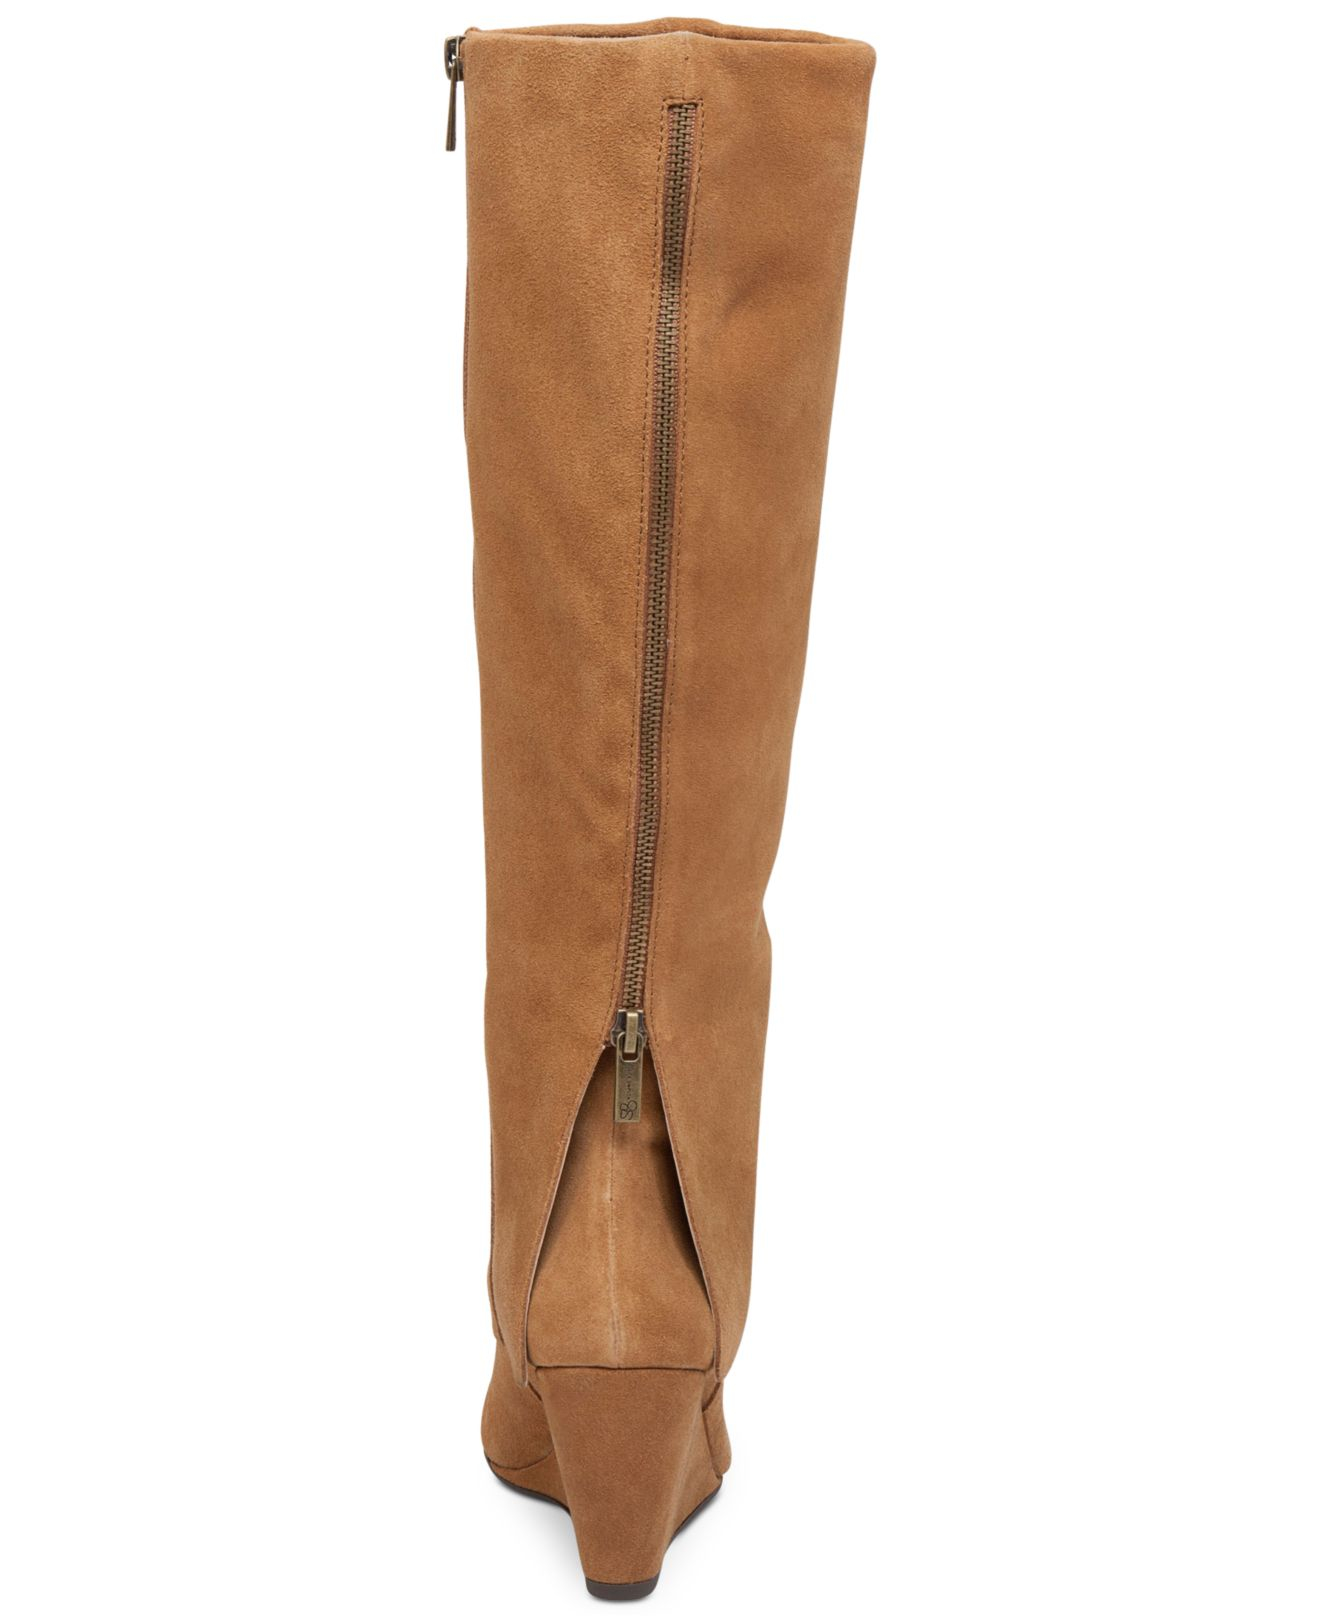 Jessica Simpson Suede Rallie Cuffed Wedge Boots in Brown - Lyst